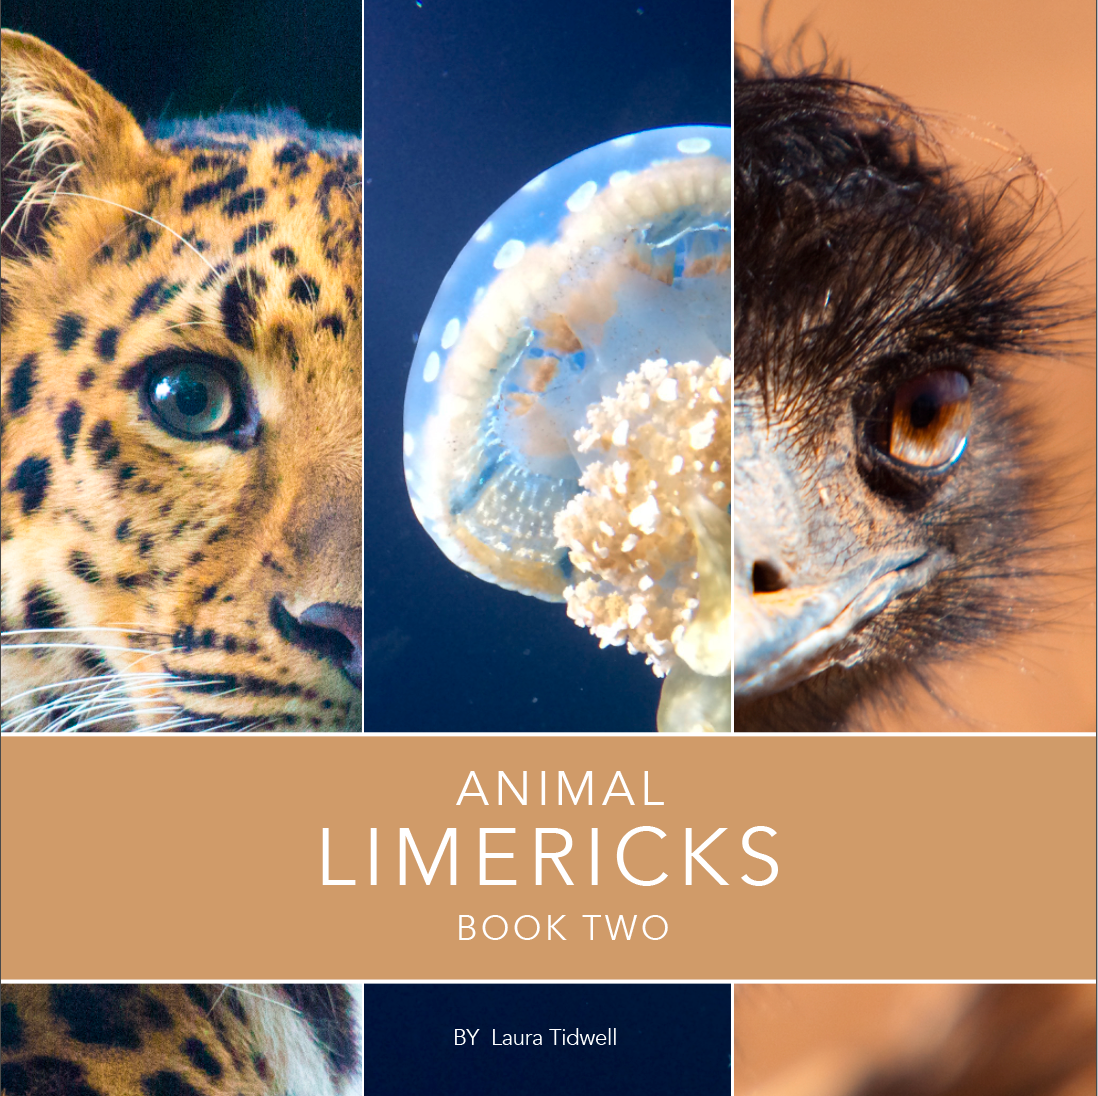 Animal Limericks Book Two - By Laura Tidwell